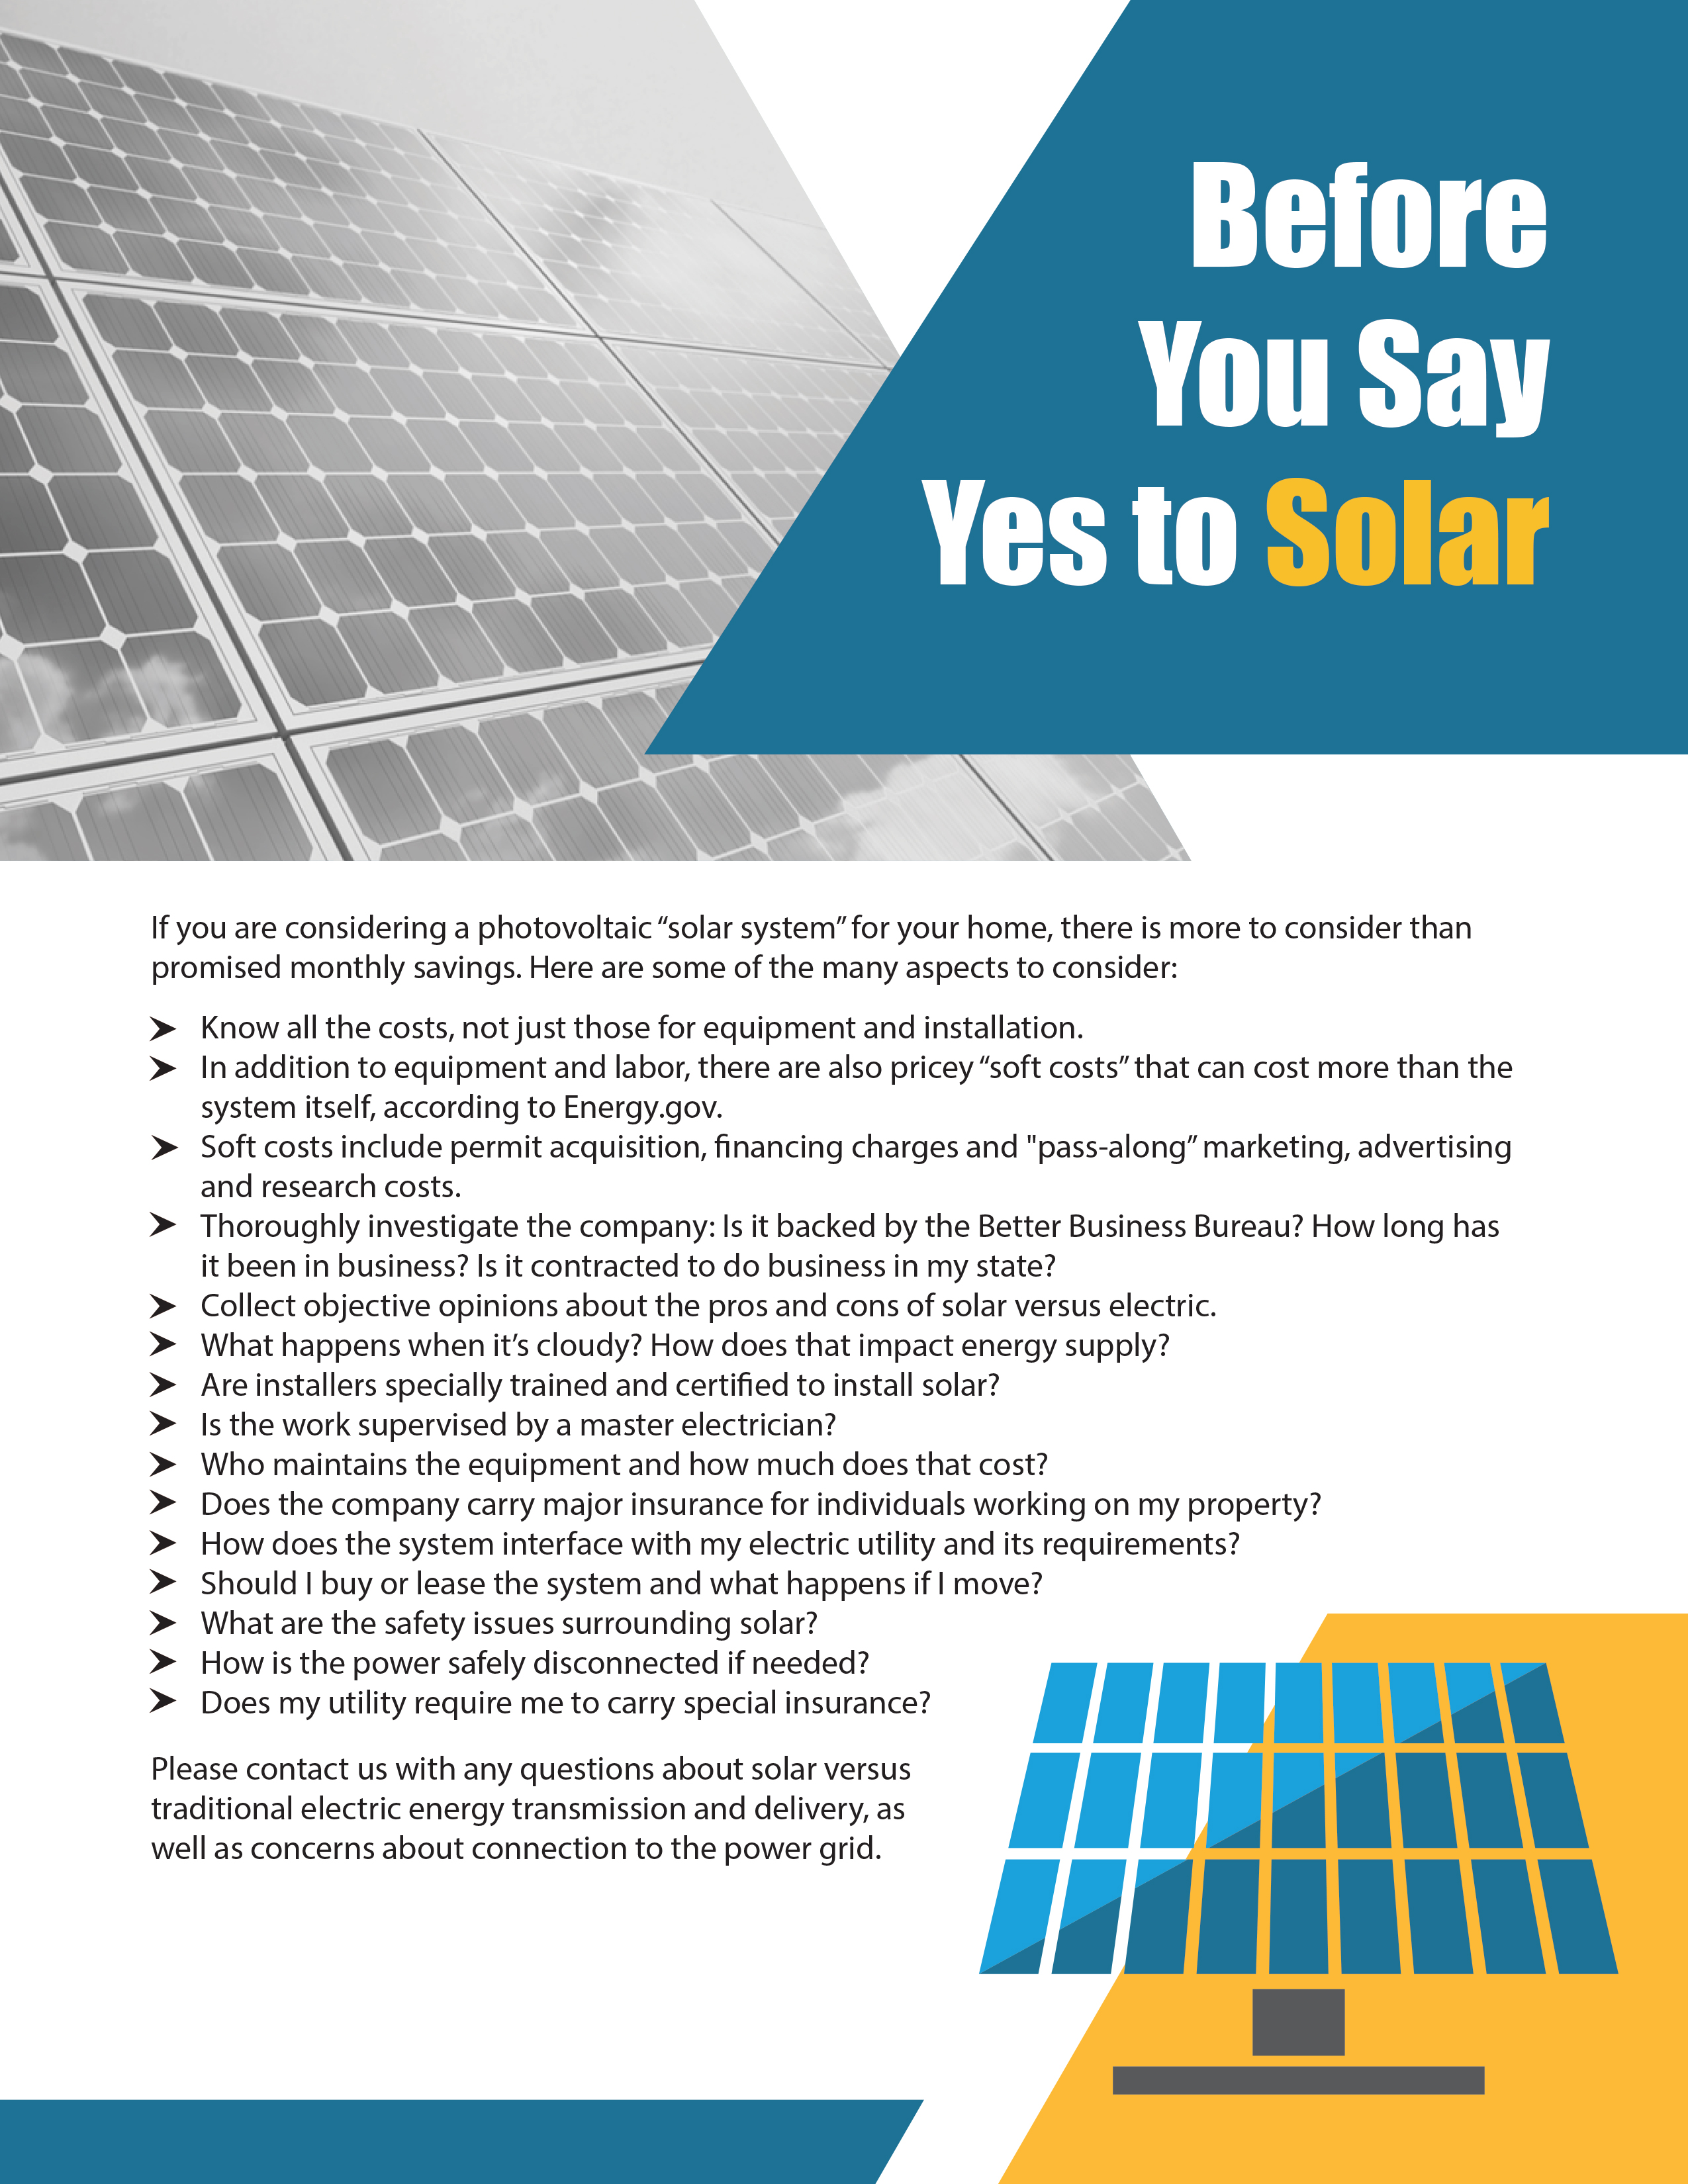 Before you say yes to solar...